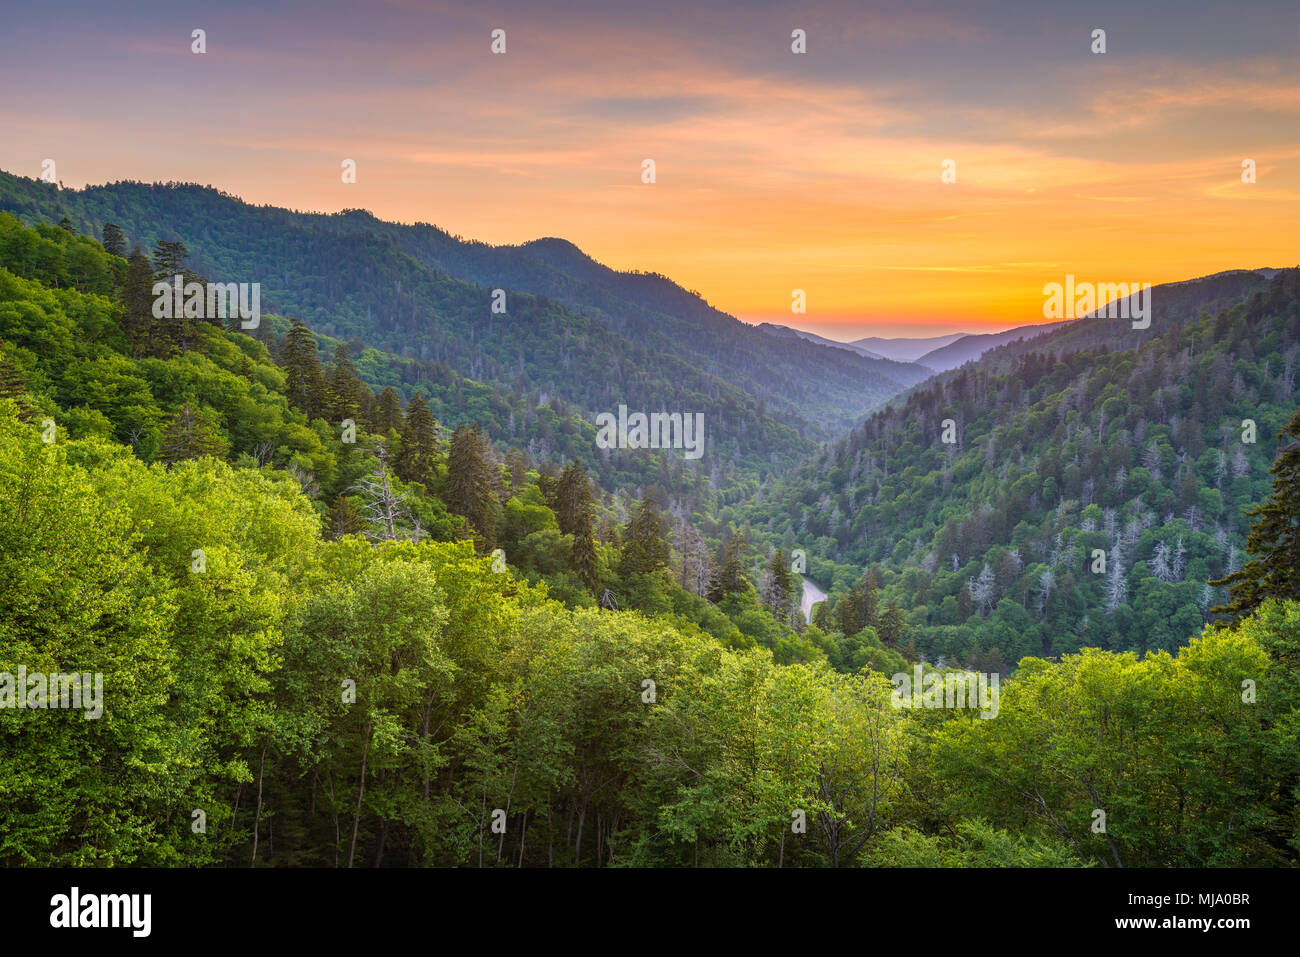 Great Smoky Mountains National Park, Tennessee, USA sunset landscape over Newfound Gap. Stock Photo